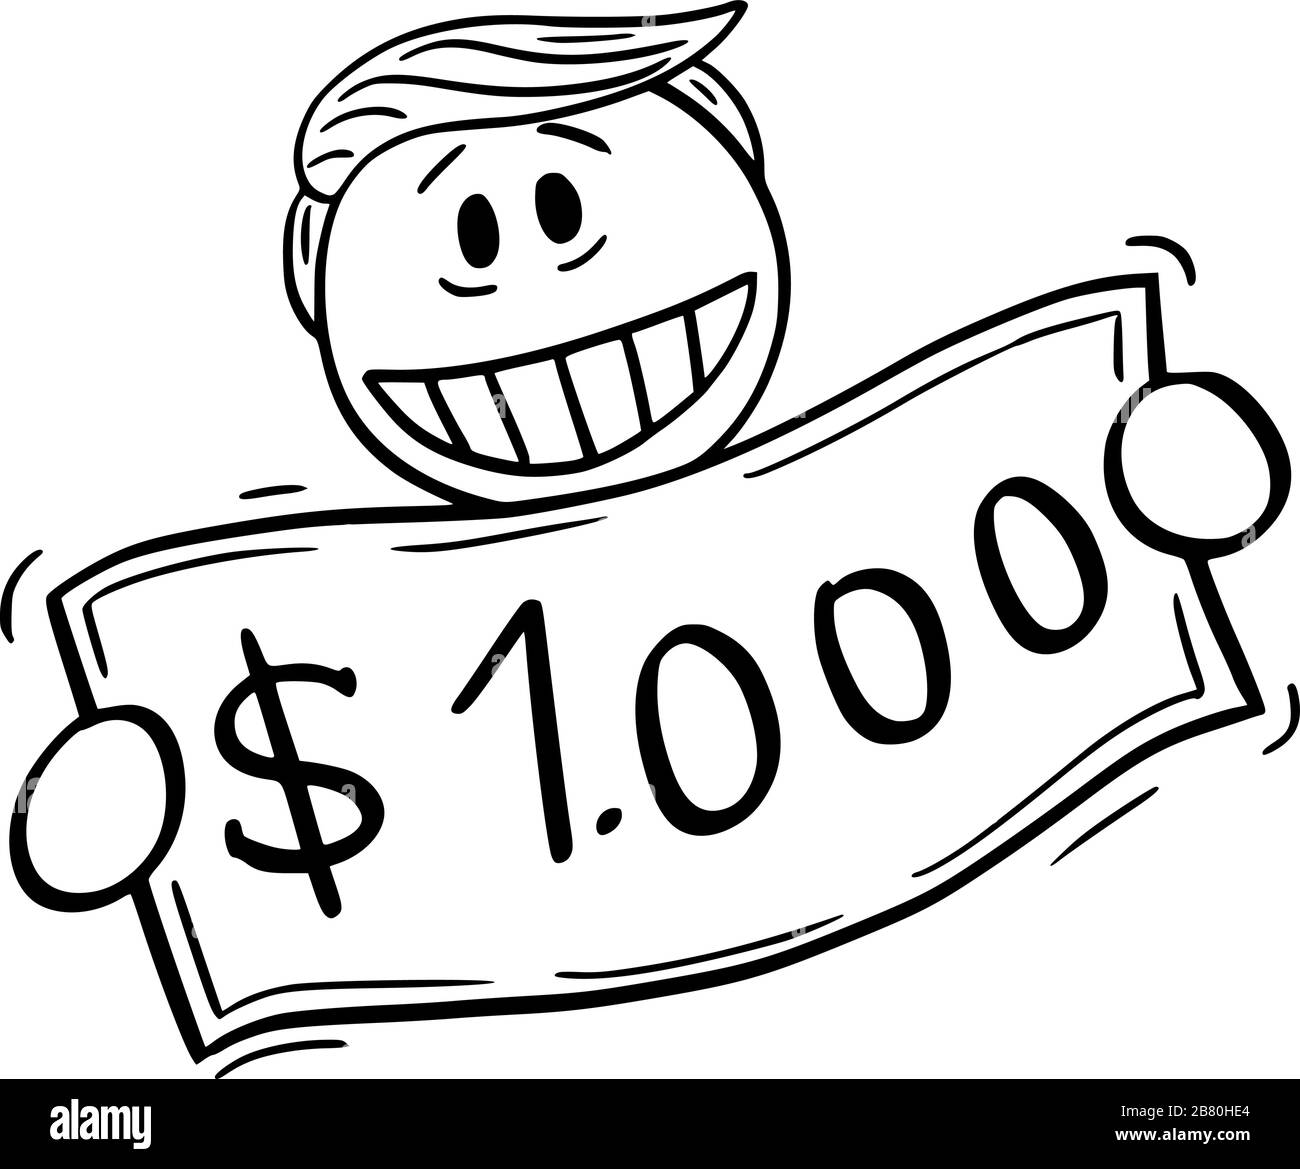 Vector illustration of American president Donald Trump holding one thousand dollars bill, using helicopter money or quantitative easing during recession.March 19,2020. Stock Vector